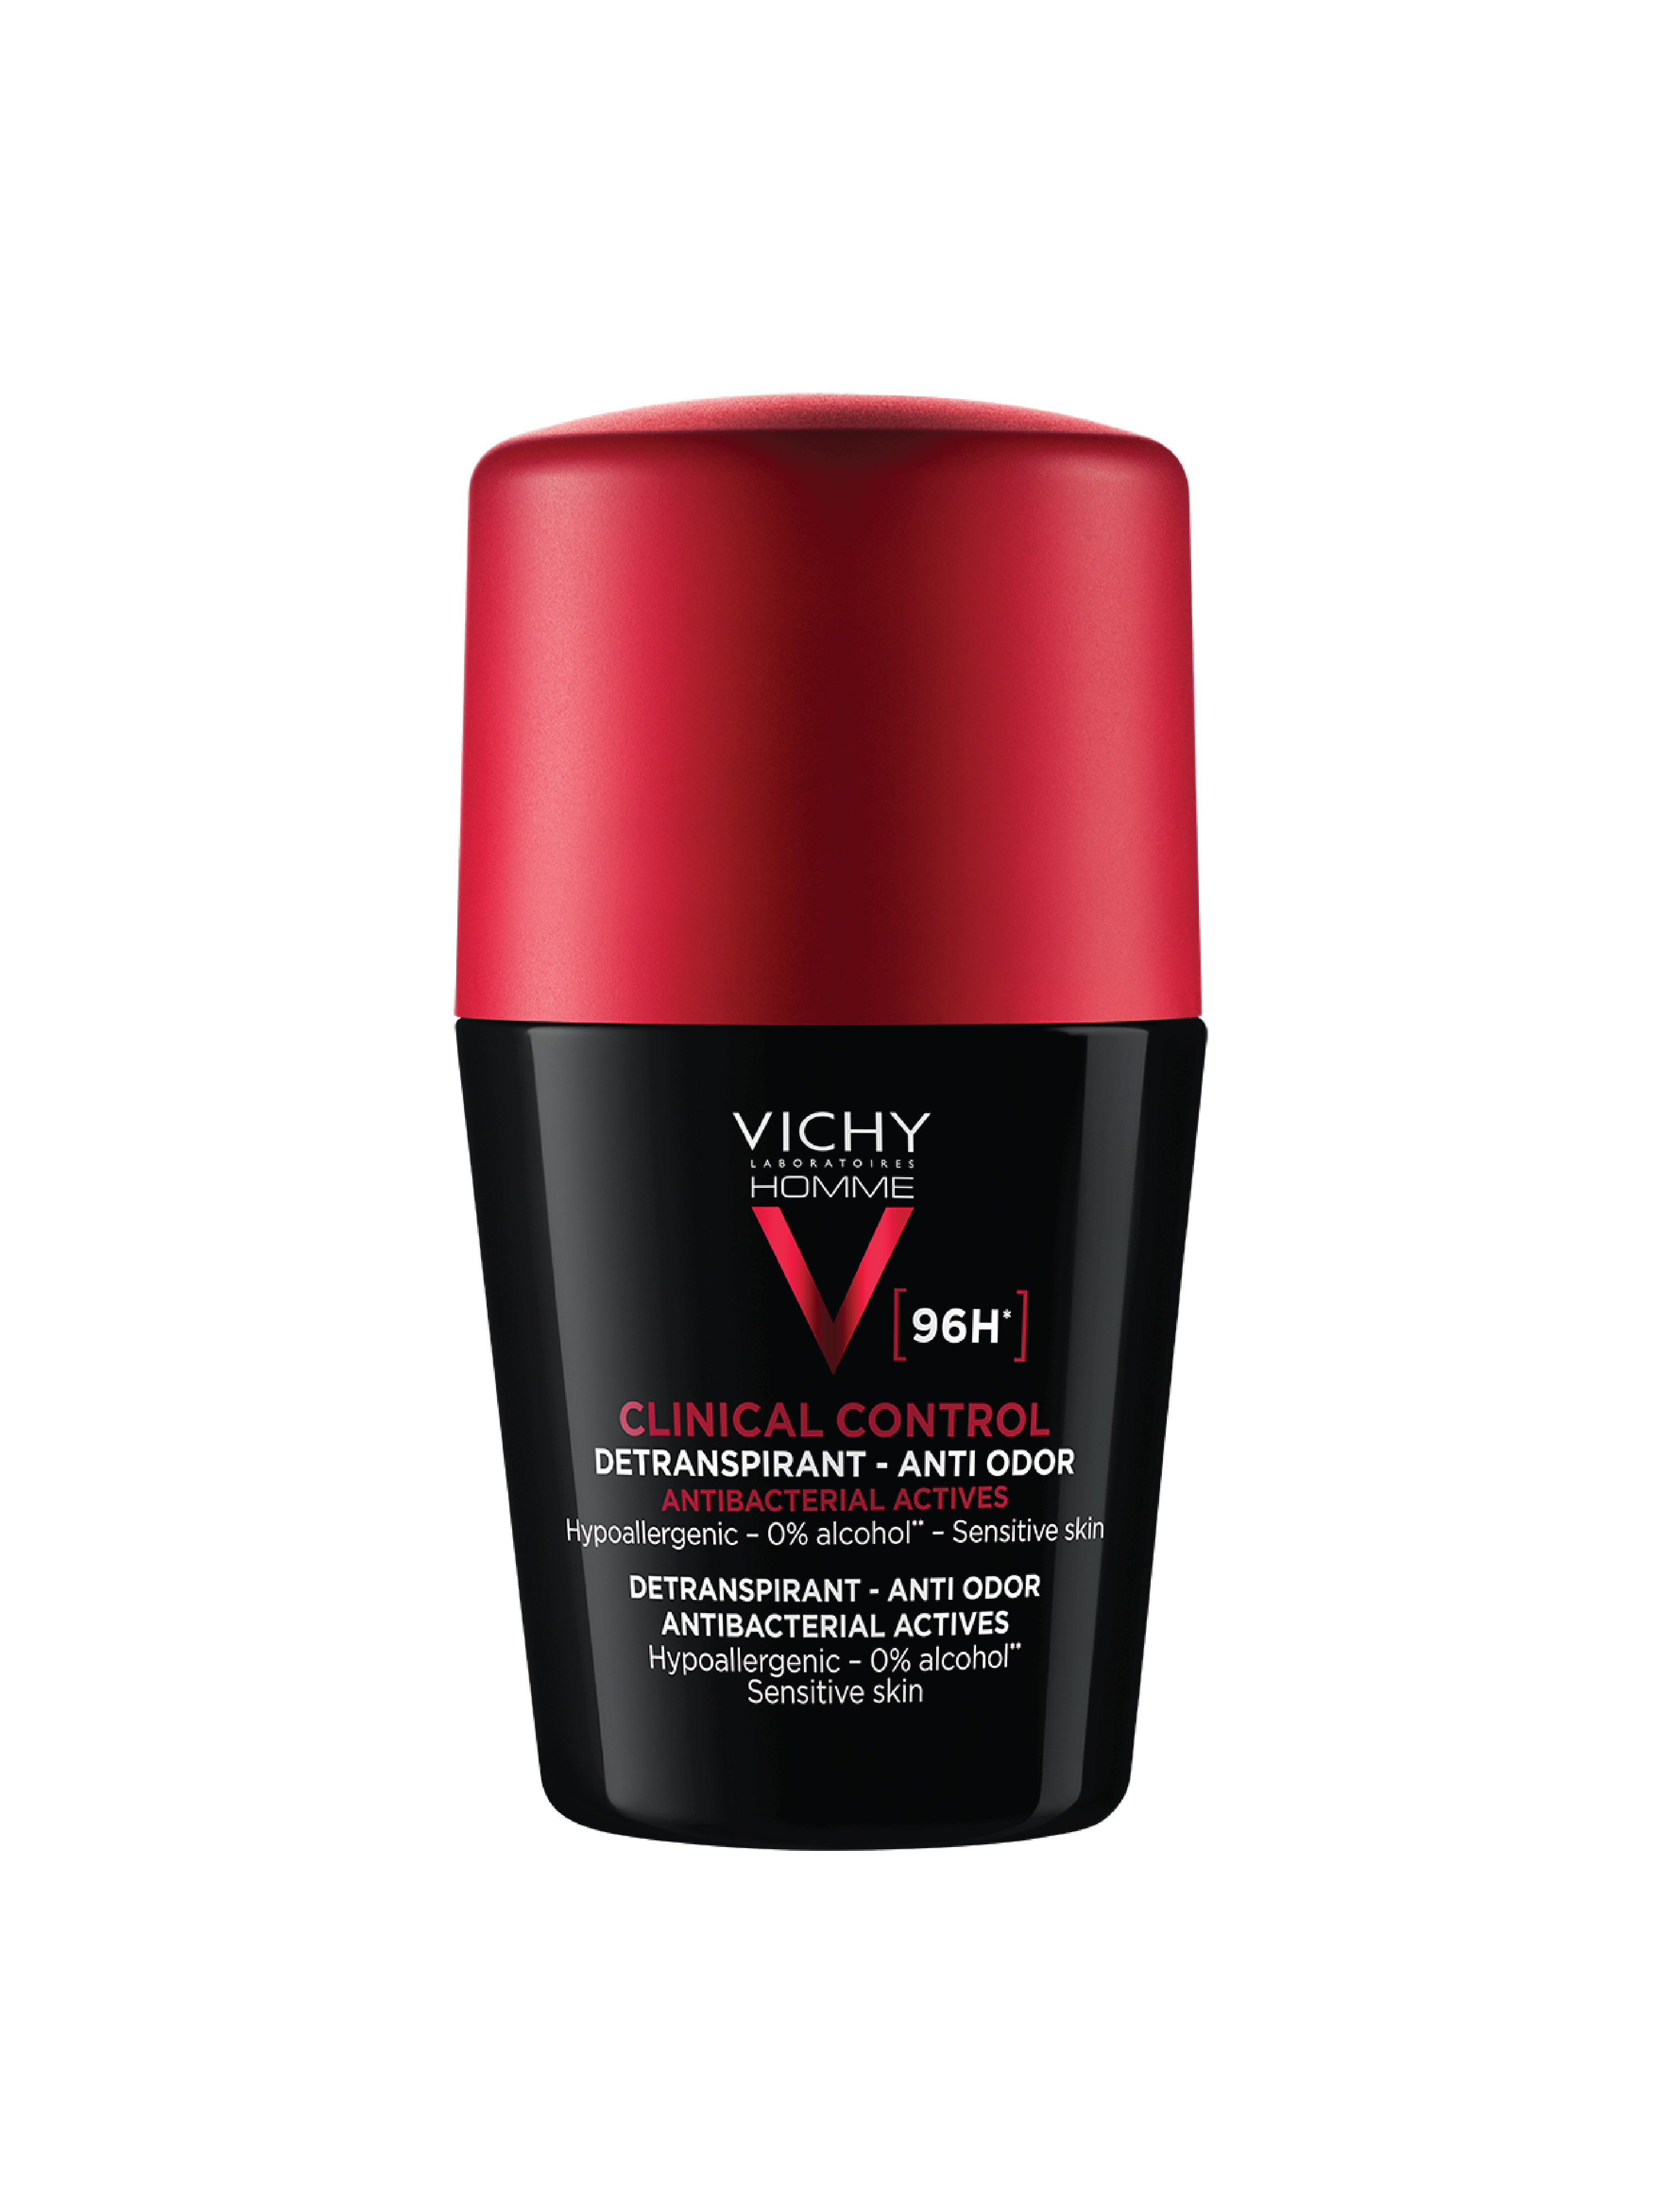 Vichy Homme Anti-Perspirant Clinical Control 96H, 50 ml